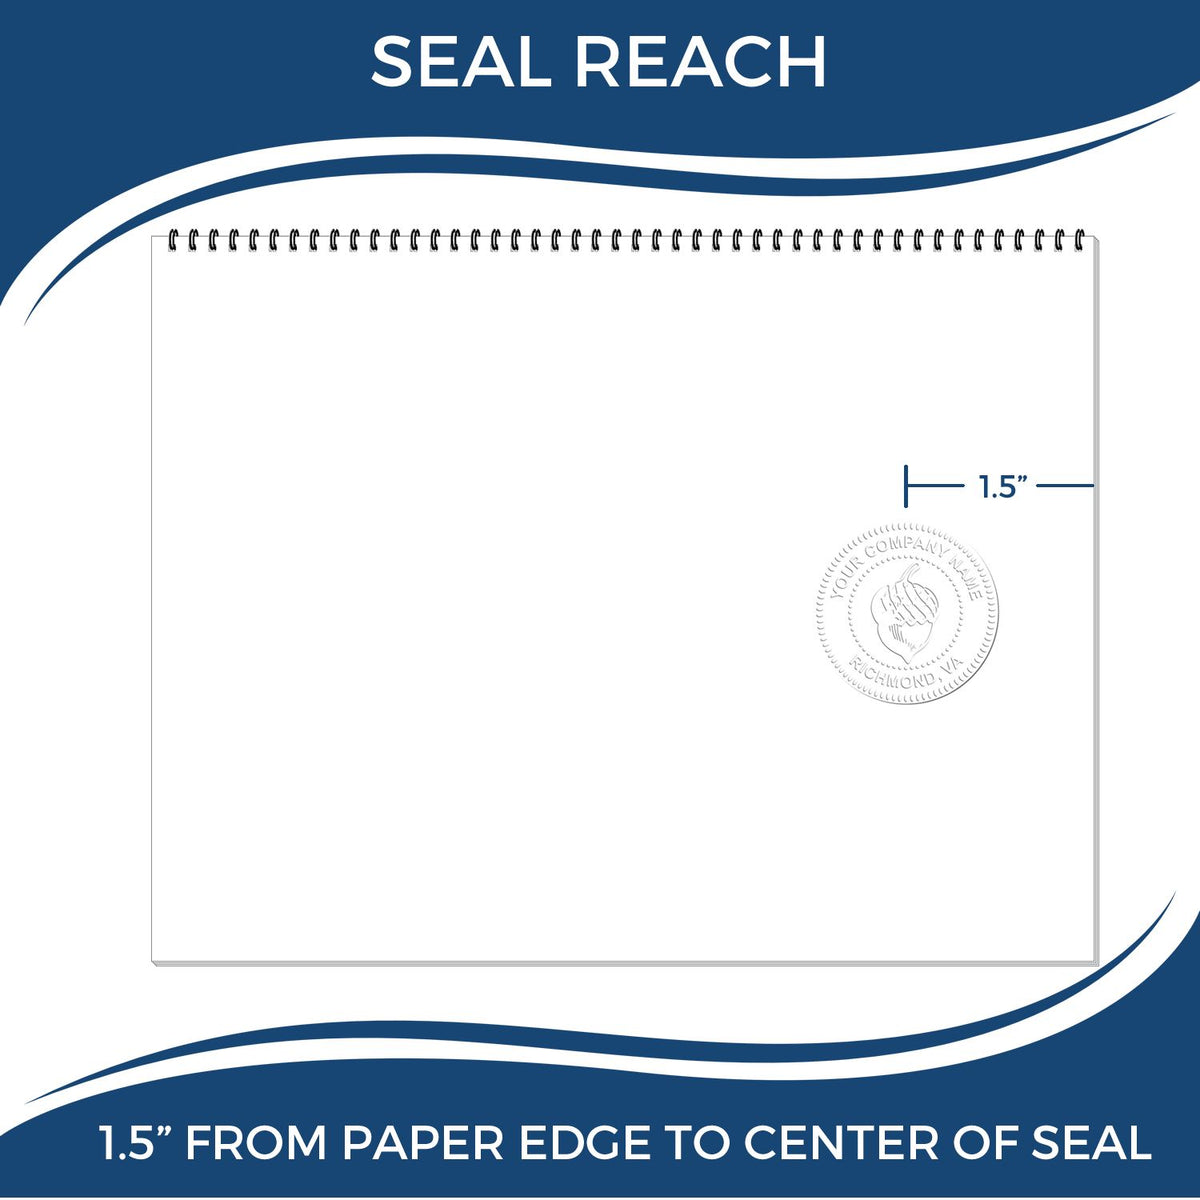 An infographic showing the seal reach which is represented by a ruler and a miniature seal image of the Hybrid Ohio Engineer Seal